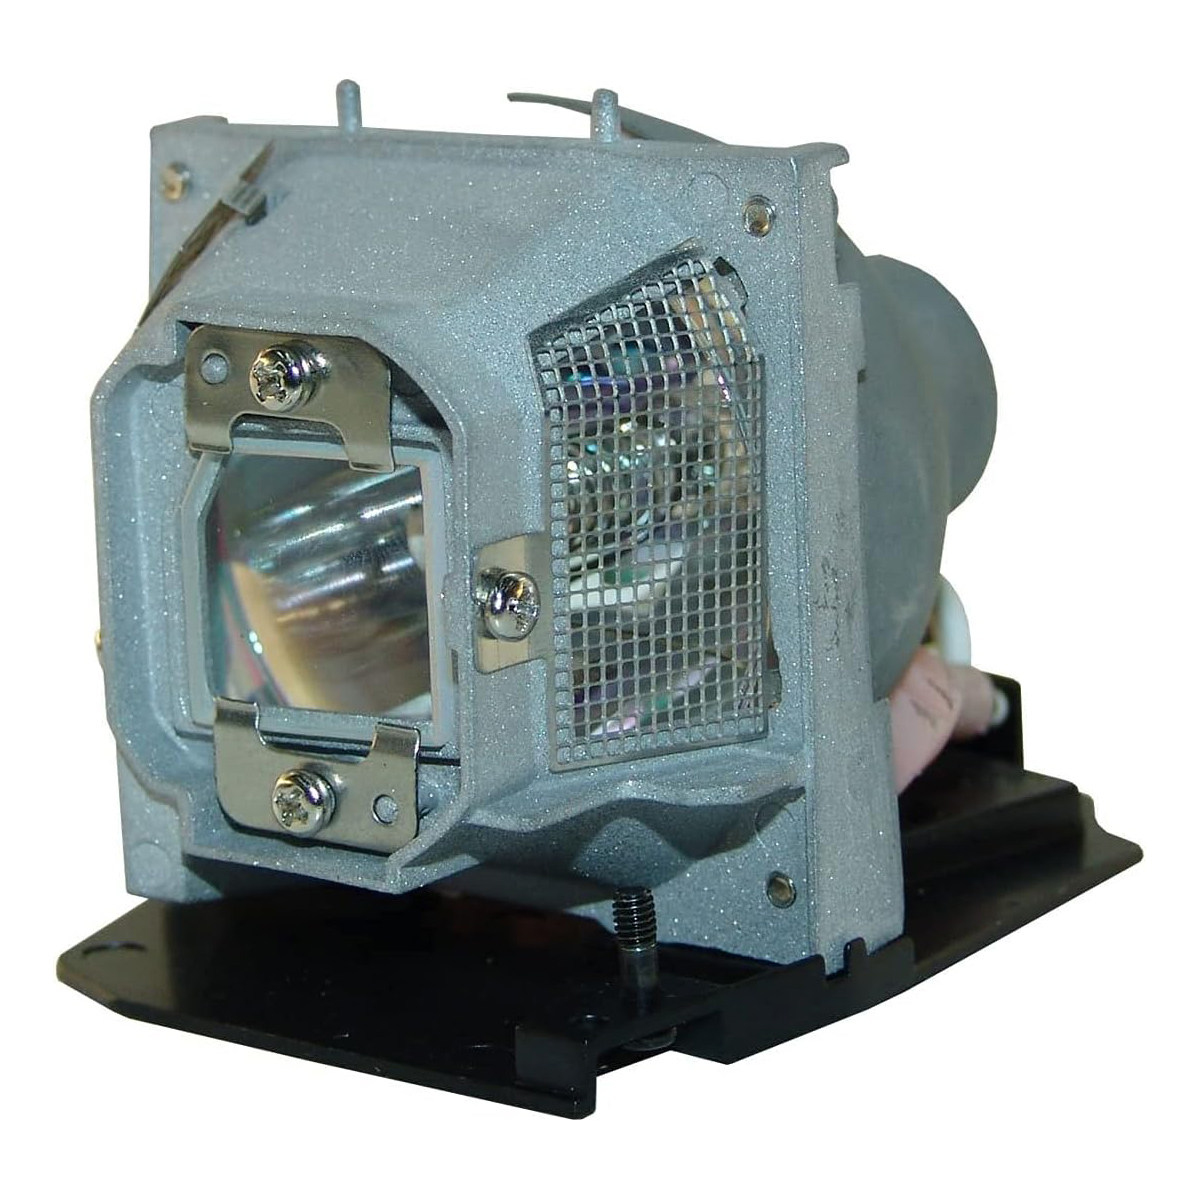 Replacement Projector lamp L1809A For HEWLETT PACKARD MP-2210 MP-2220